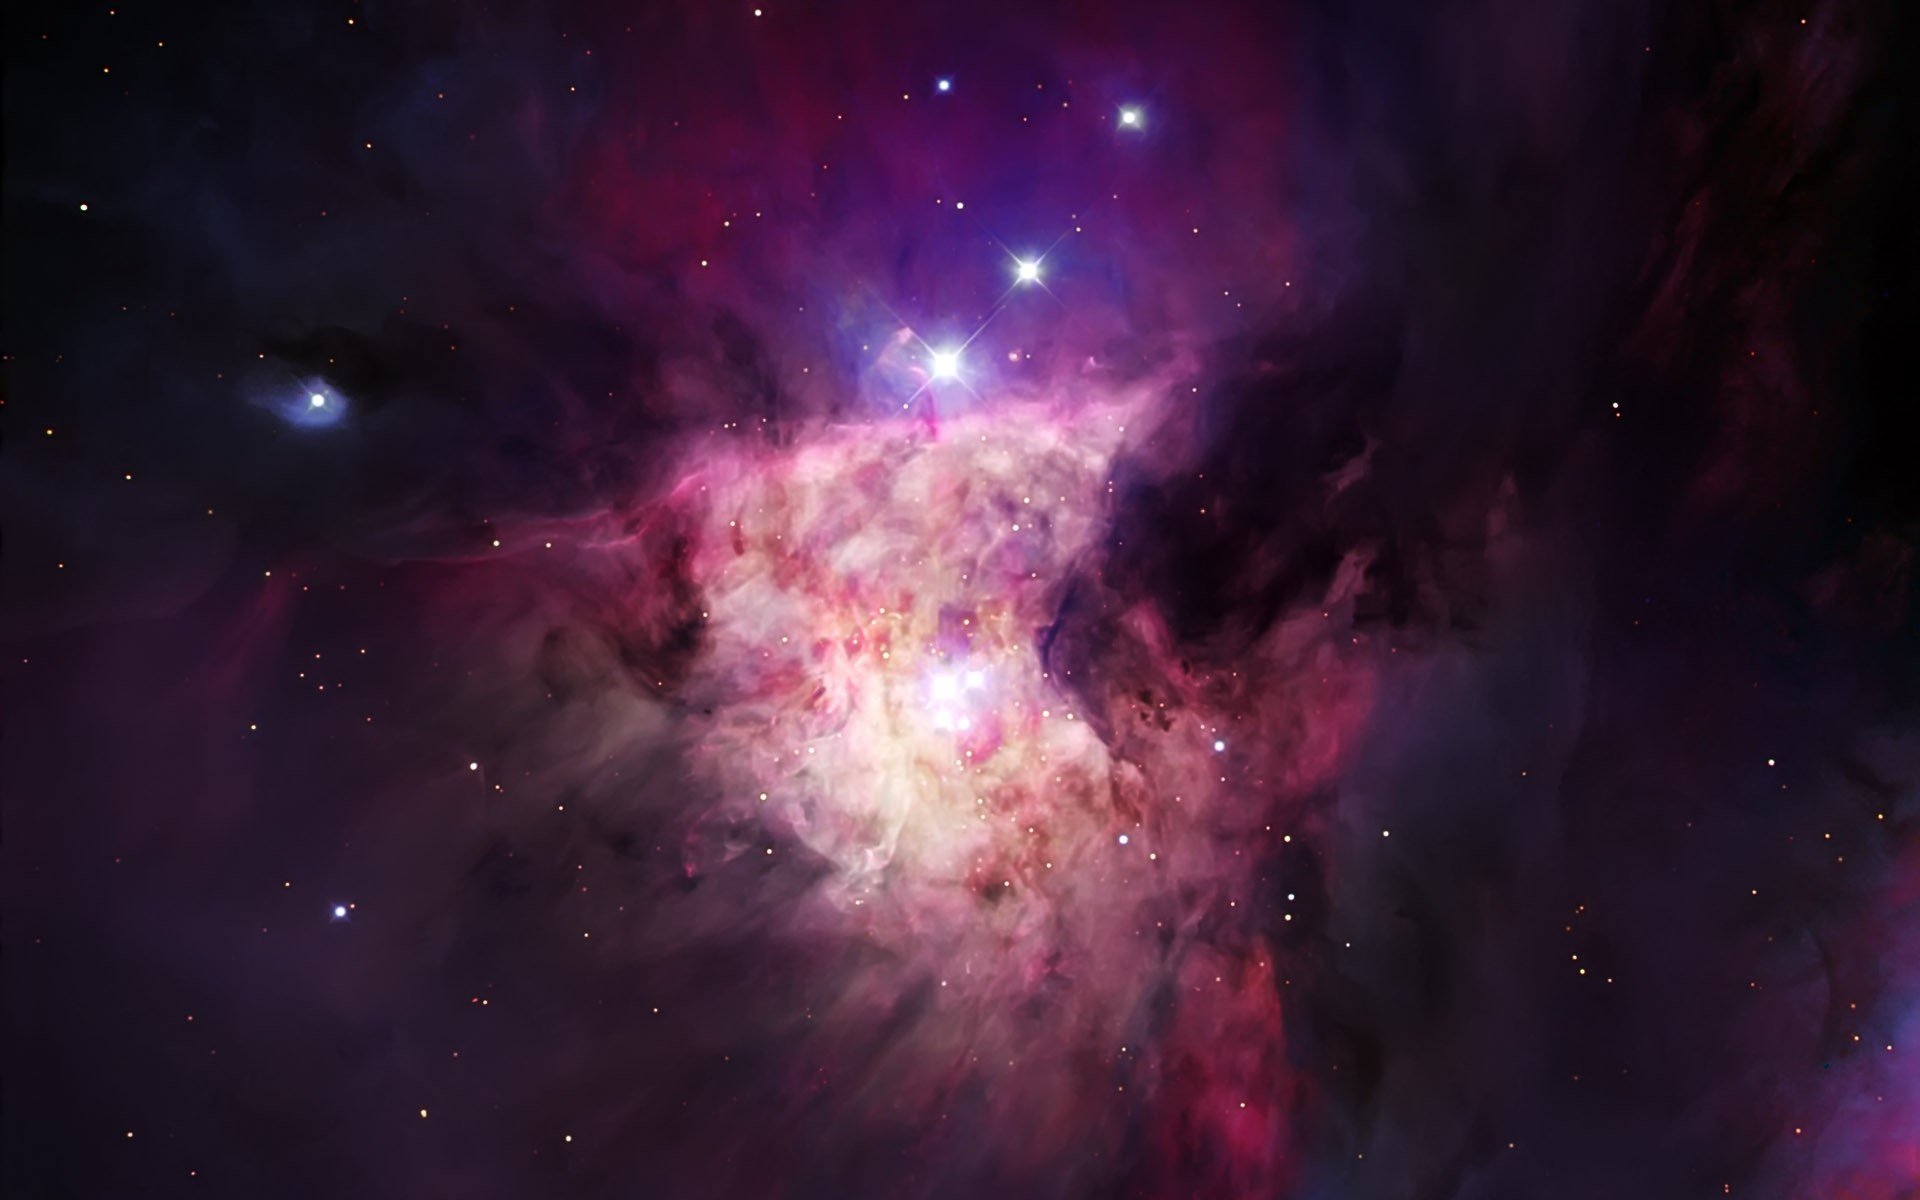 scape, Stars, Hubble, Space, Telescope, The, Real, Galaxies, Pink Wallpaper